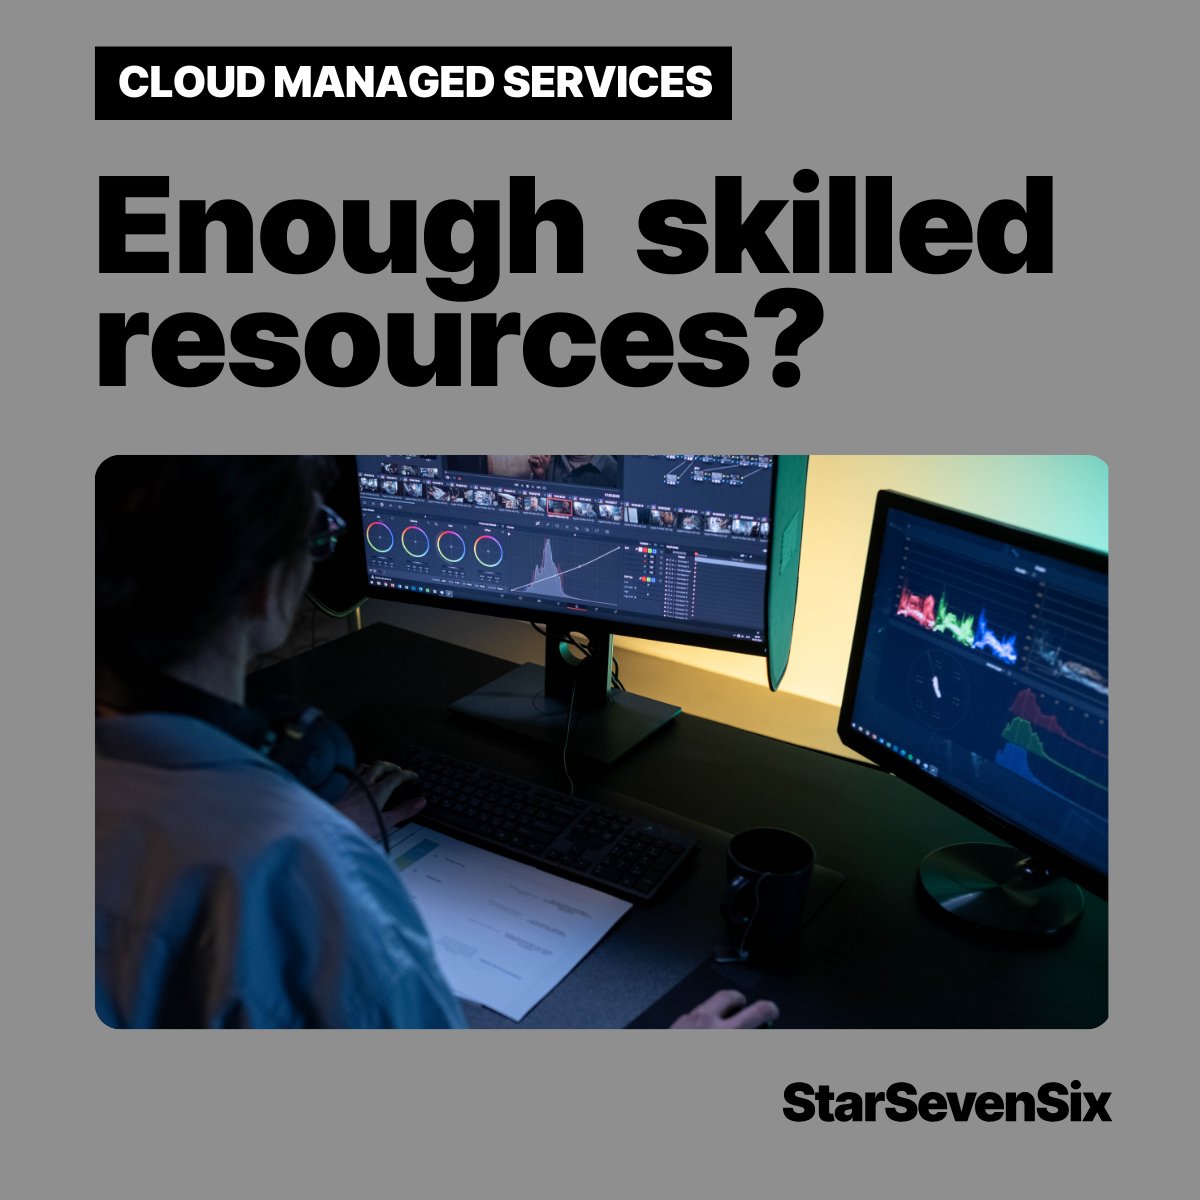 Struggling to find the right talent for your cloud needs? 🤹‍♂️ Our team is your team. 

Discover how our Cloud Managed Services bring the expertise you need. 

Learn More: starsevensix.com/services/manag…

#CloudExperts #TechTalent #ManagedITServices #SkillGap #TechnologySolutions